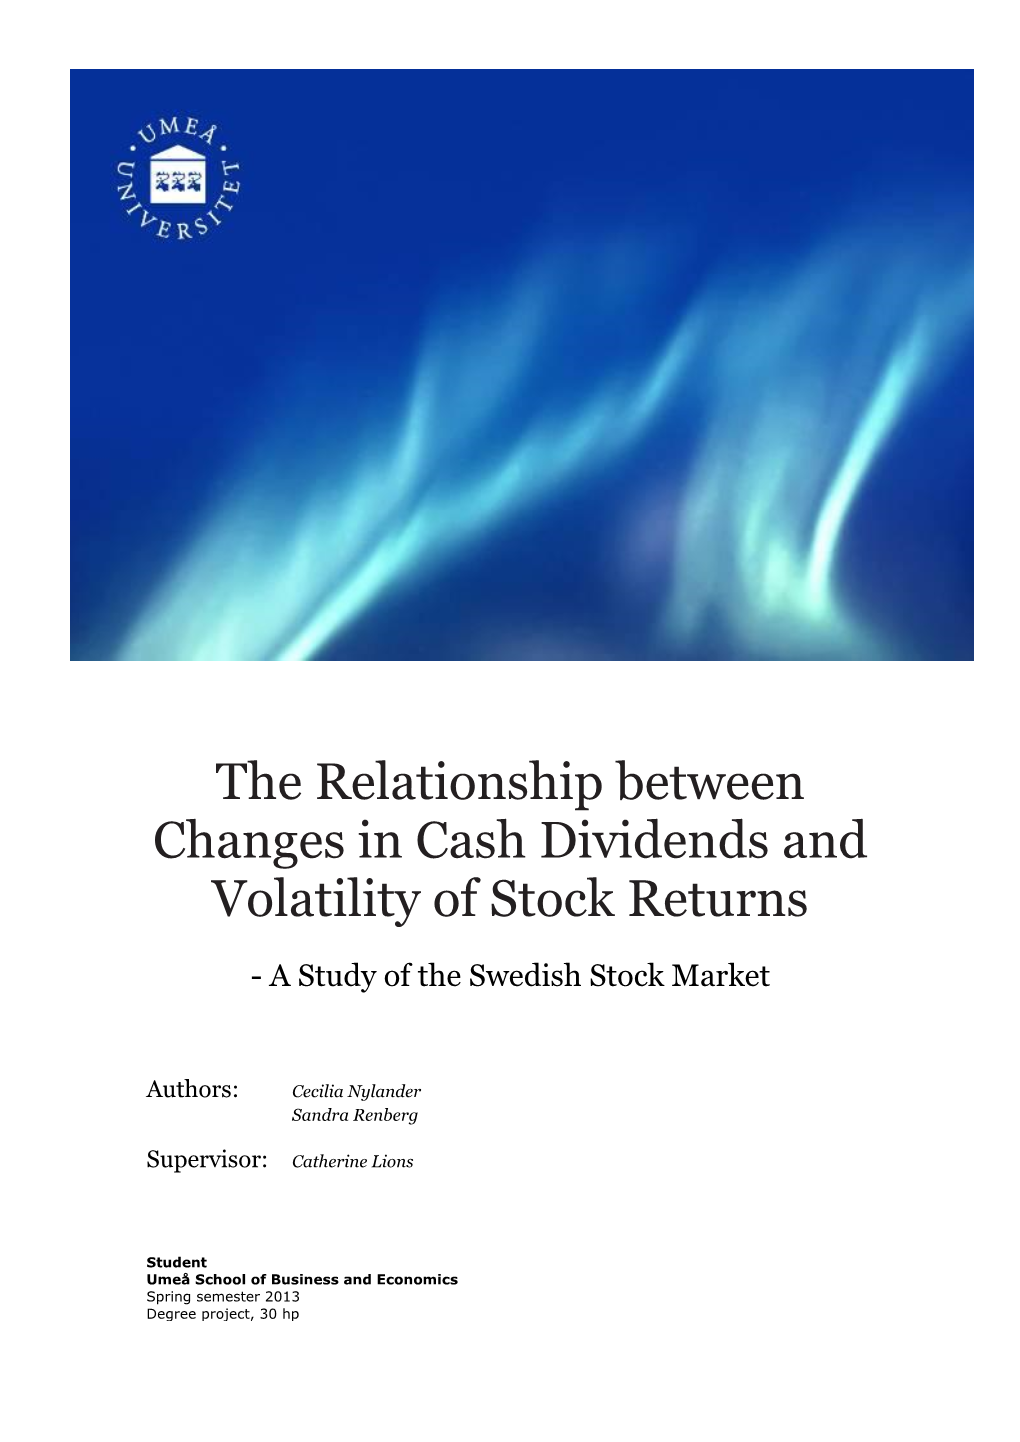 The Relationship Between Changes in Cash Dividends and Volatility of Stock Returns